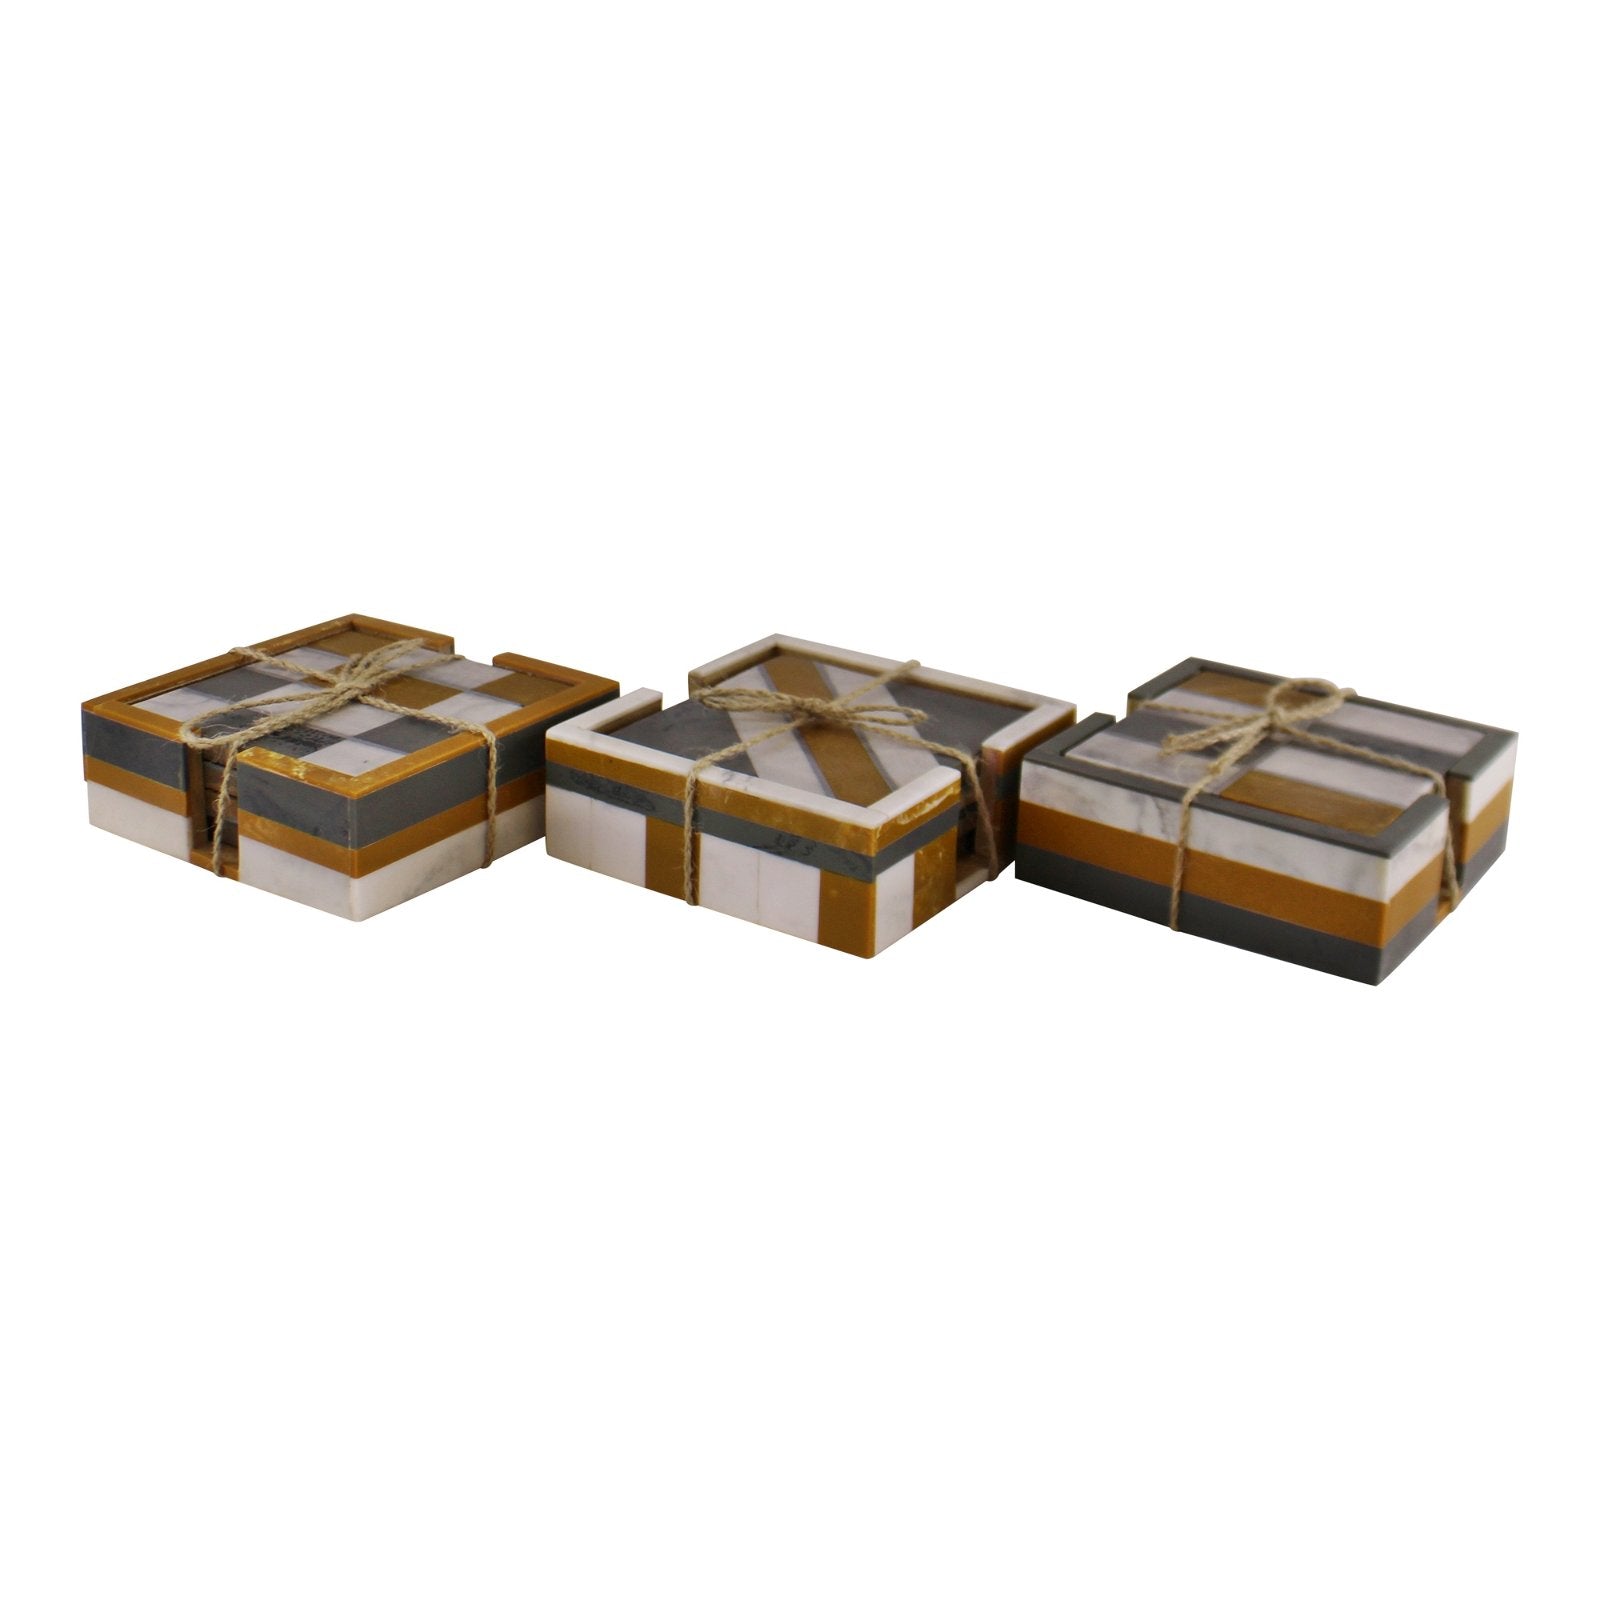 Set of 4 Square, Resin Coasters, Abstract Design - Kaftan direct